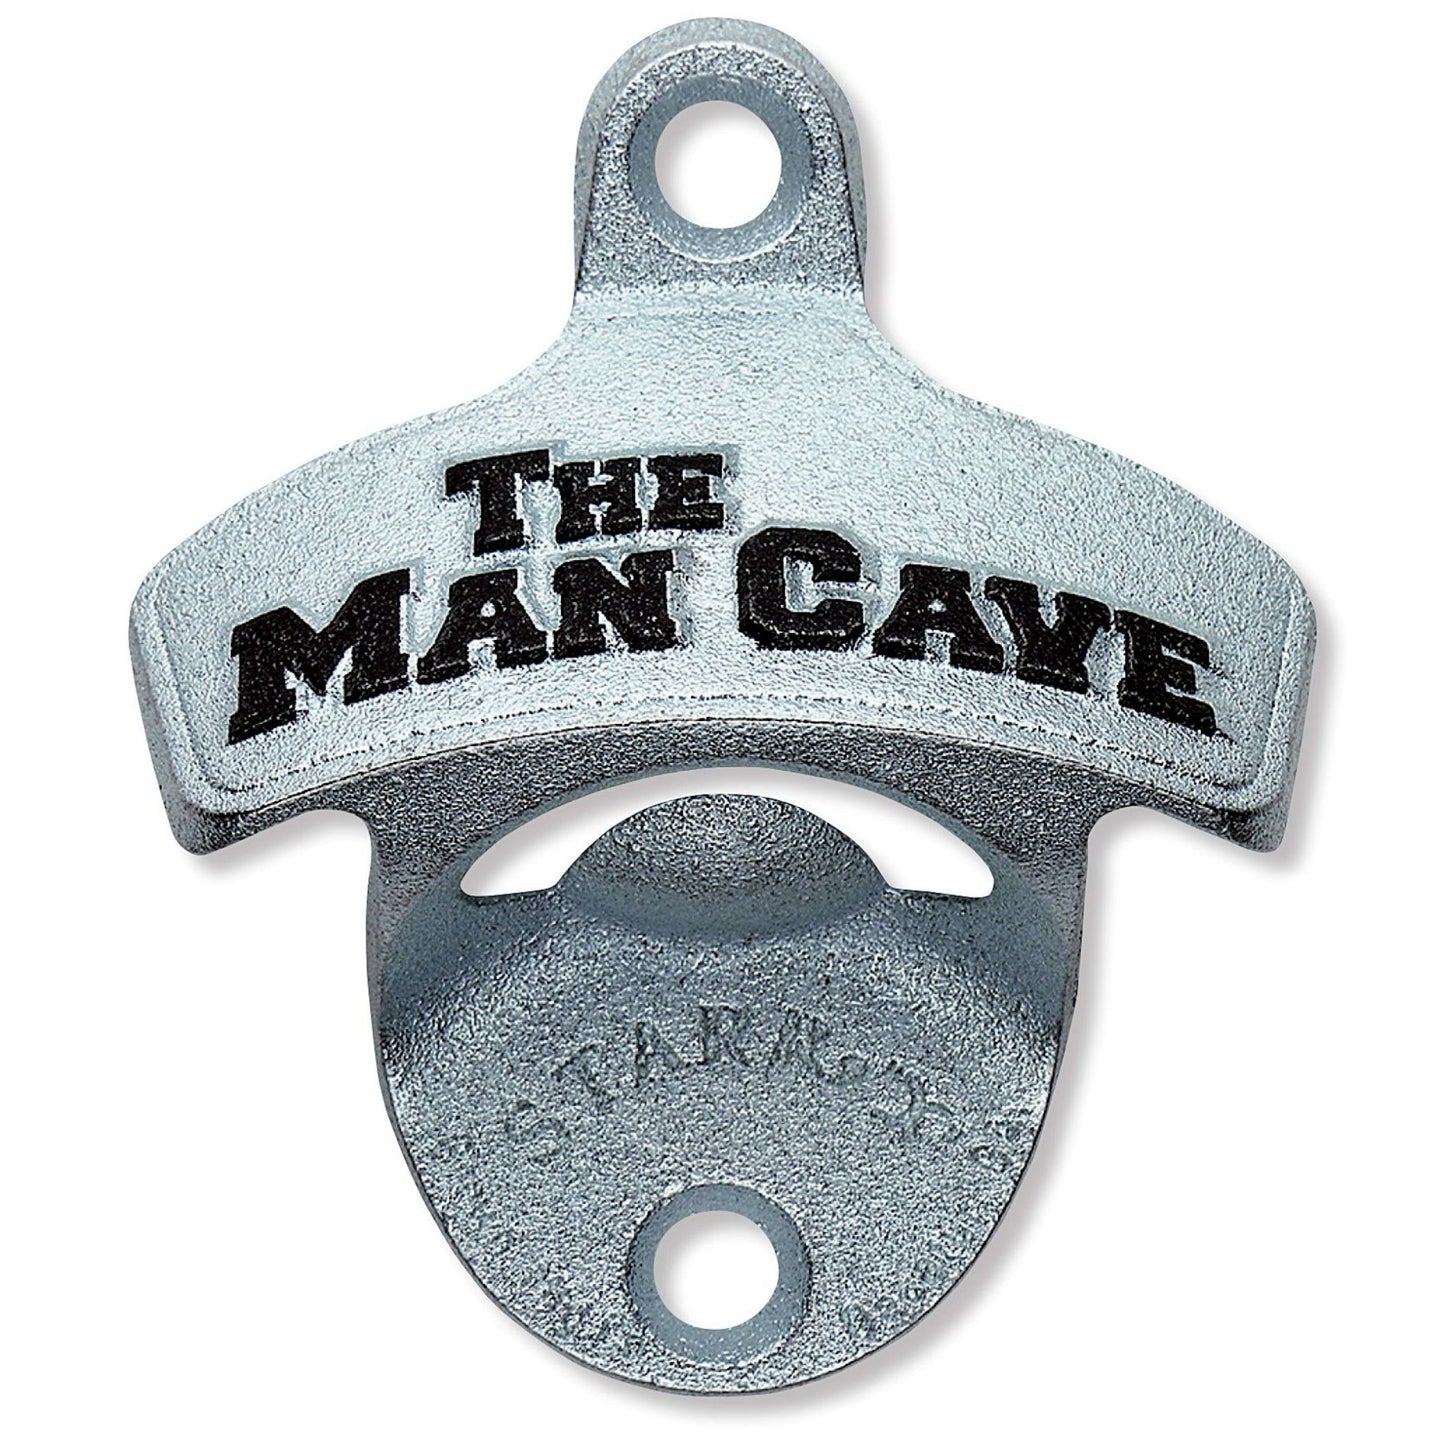 'The Man Cave' Cast Iron Series Wall Mounted Bottle Opener